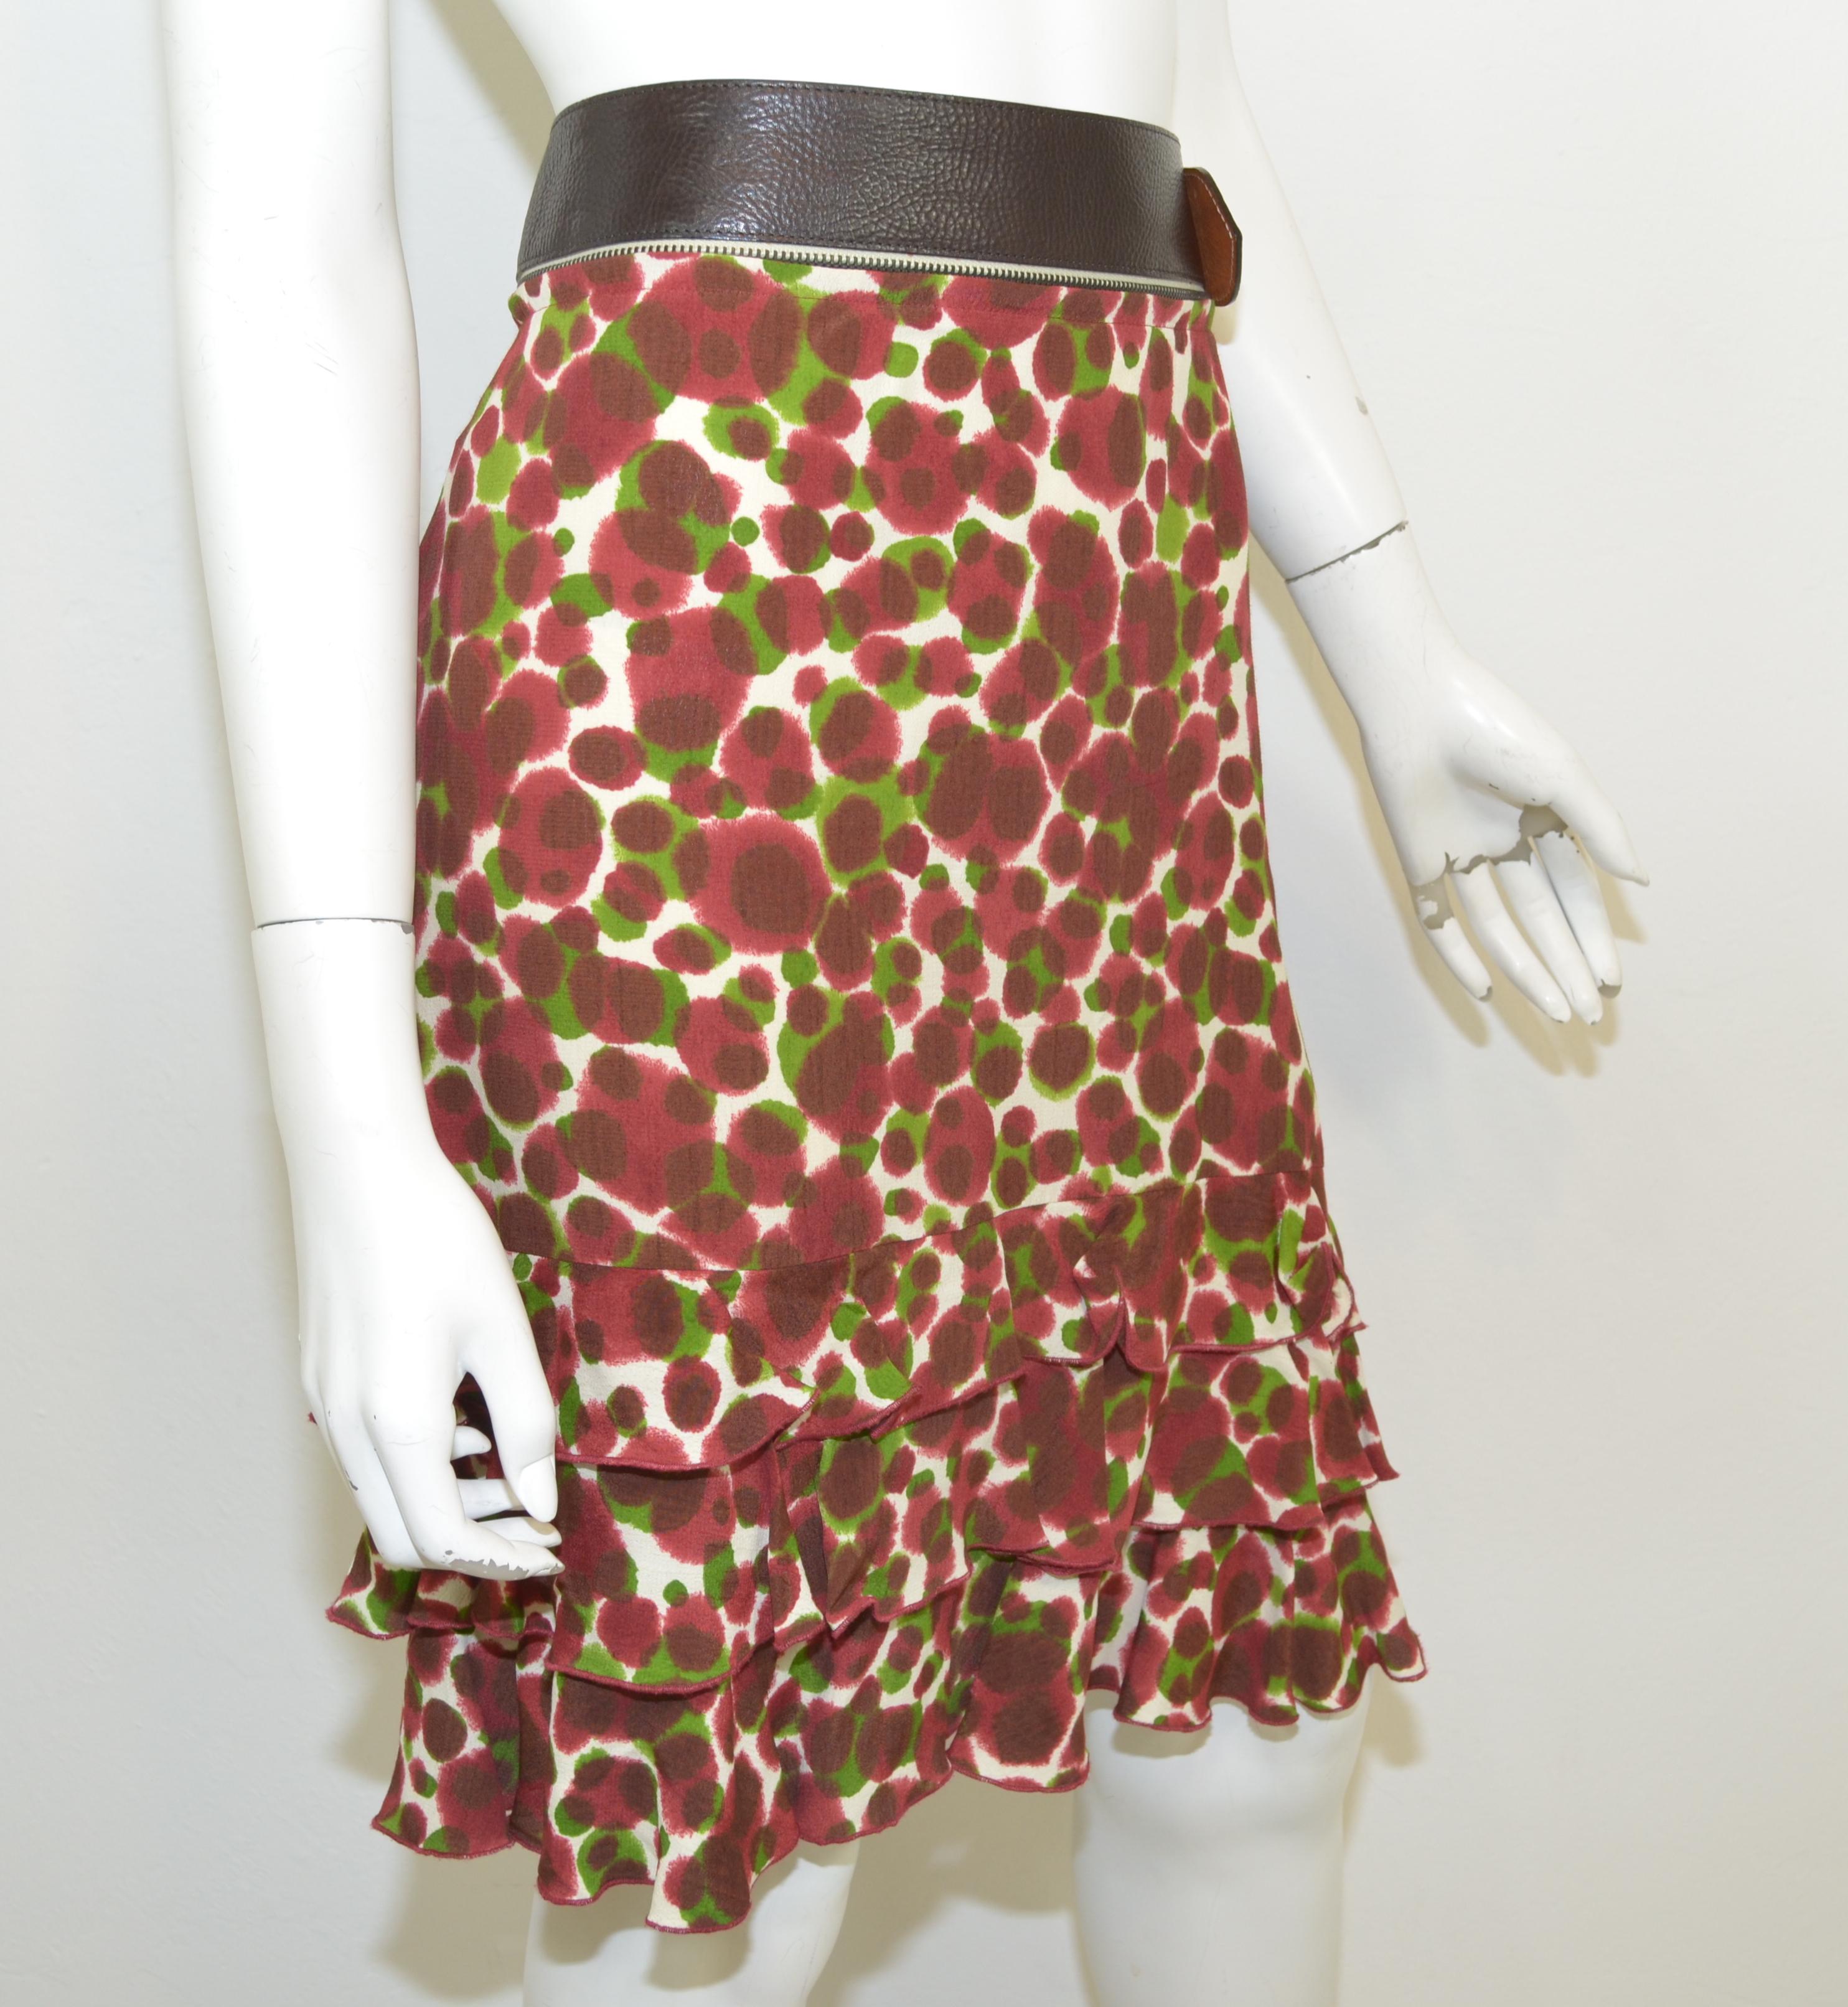 Jean Paul Gaultier skirt is featured in a maroon, green, and cream print with a ruffled hem, side zipper and button closure, and an optional belt. Skirt is composed with 100% rayon, made in Italy. 

Measurements:
Waist 32'', Hips 37'', Length 22''